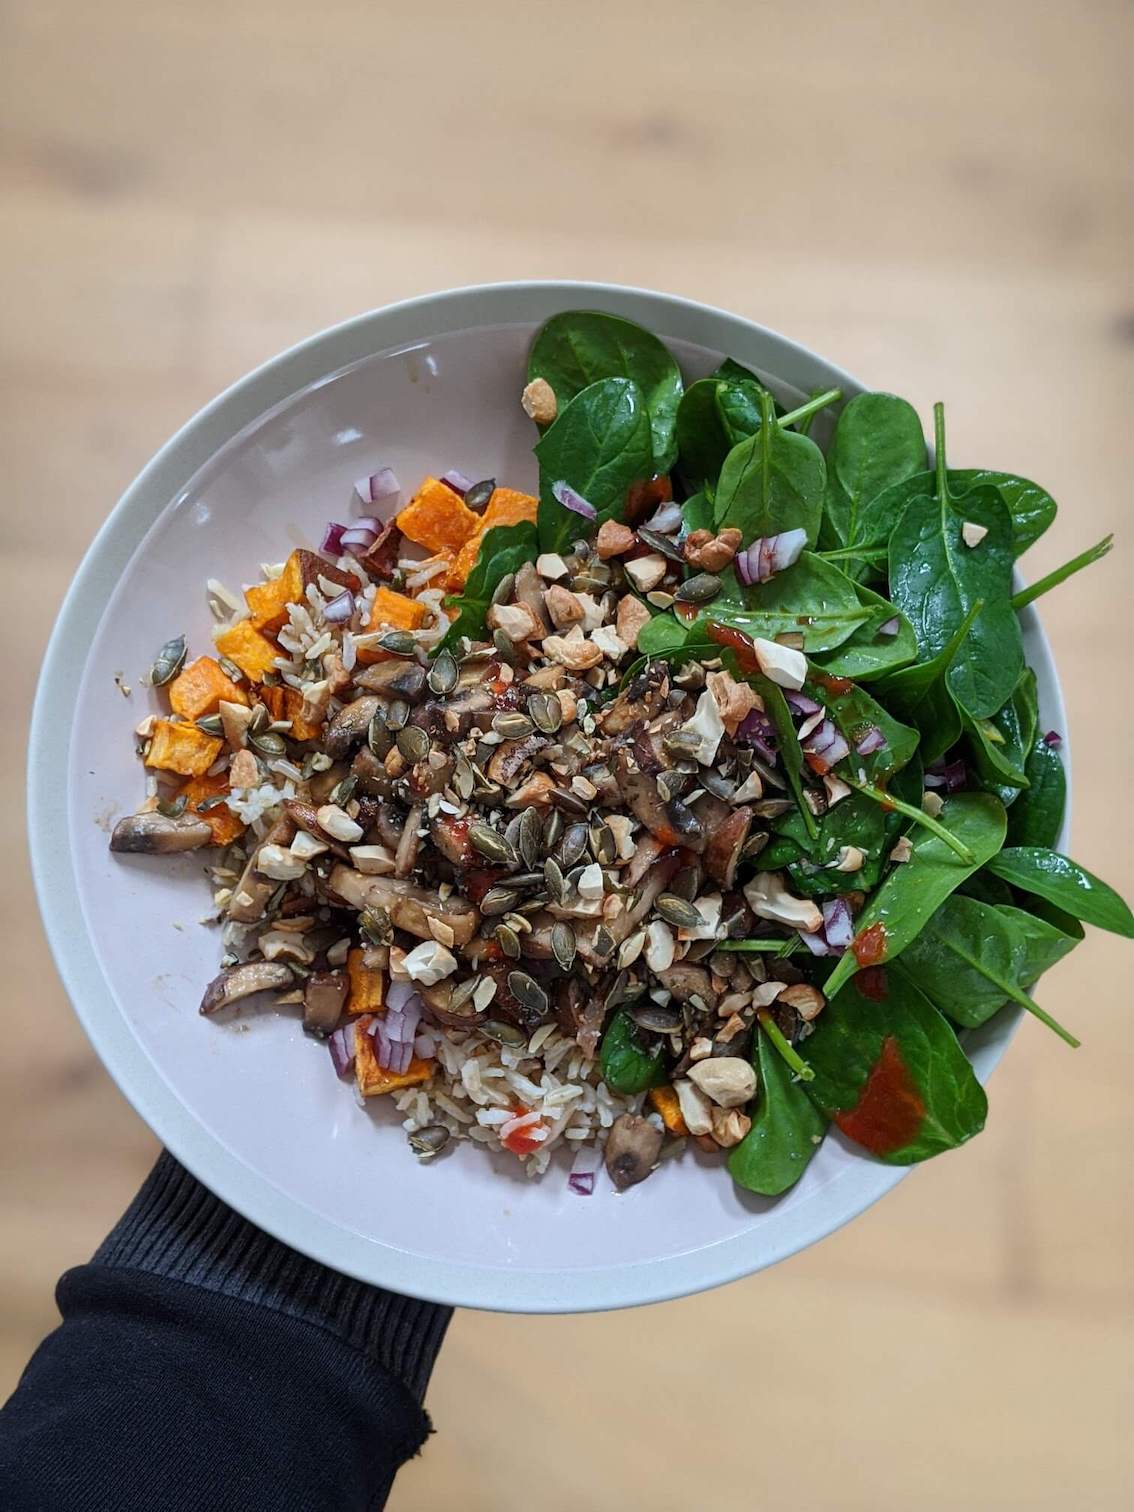 Sweet potato, rice, spinach, mushrooms, seeds, red onion